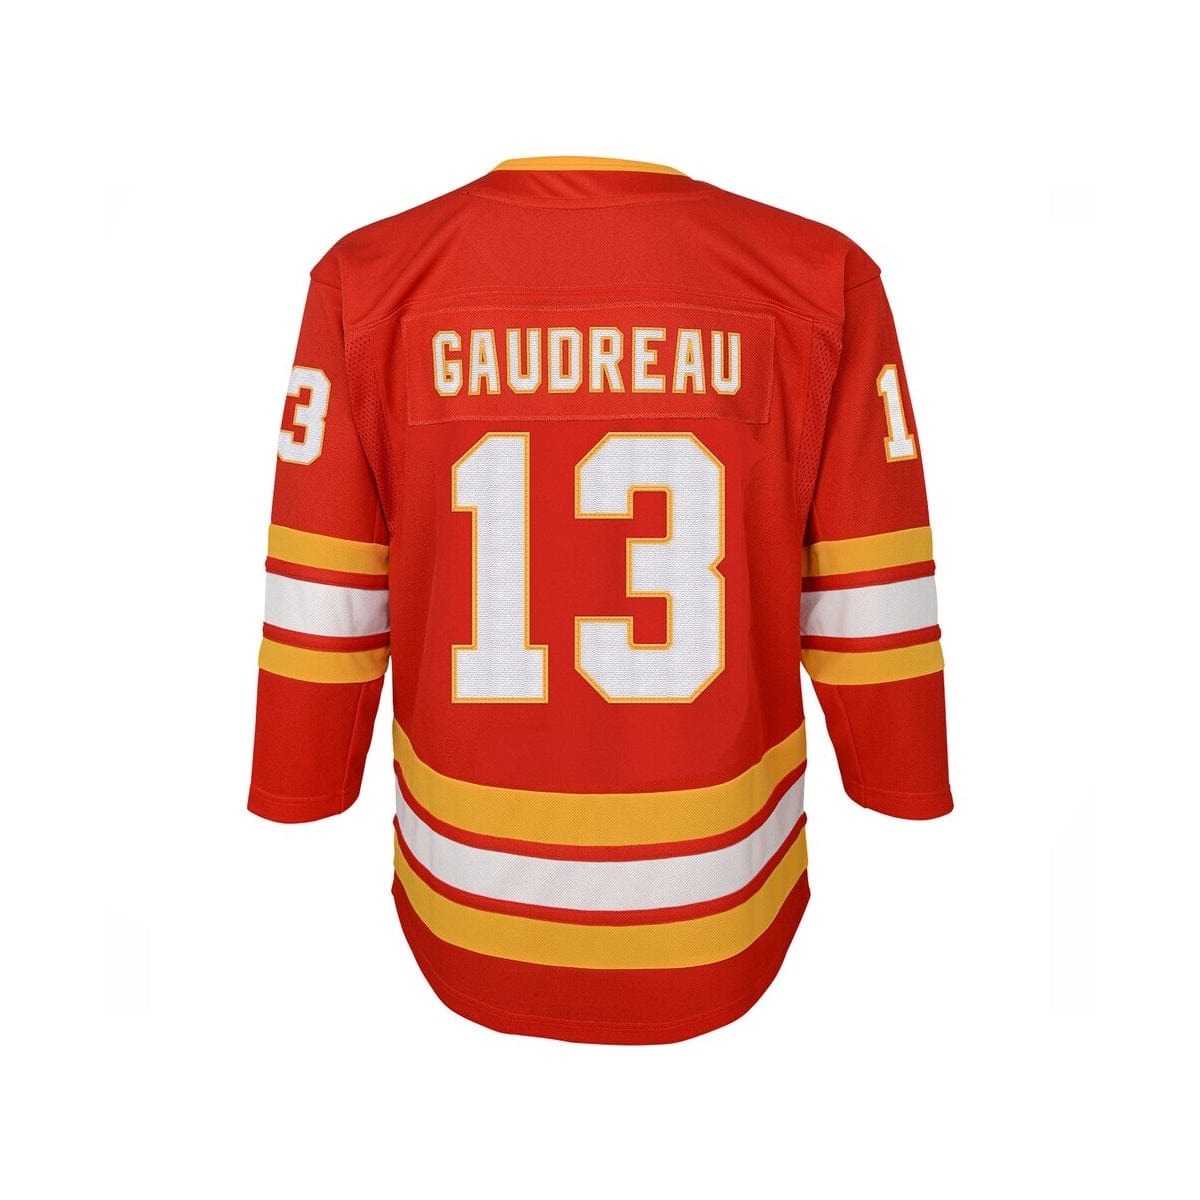 Calgary Flames Home Outer Stuff Premier Youth Jersey - Johnny Gaudreau